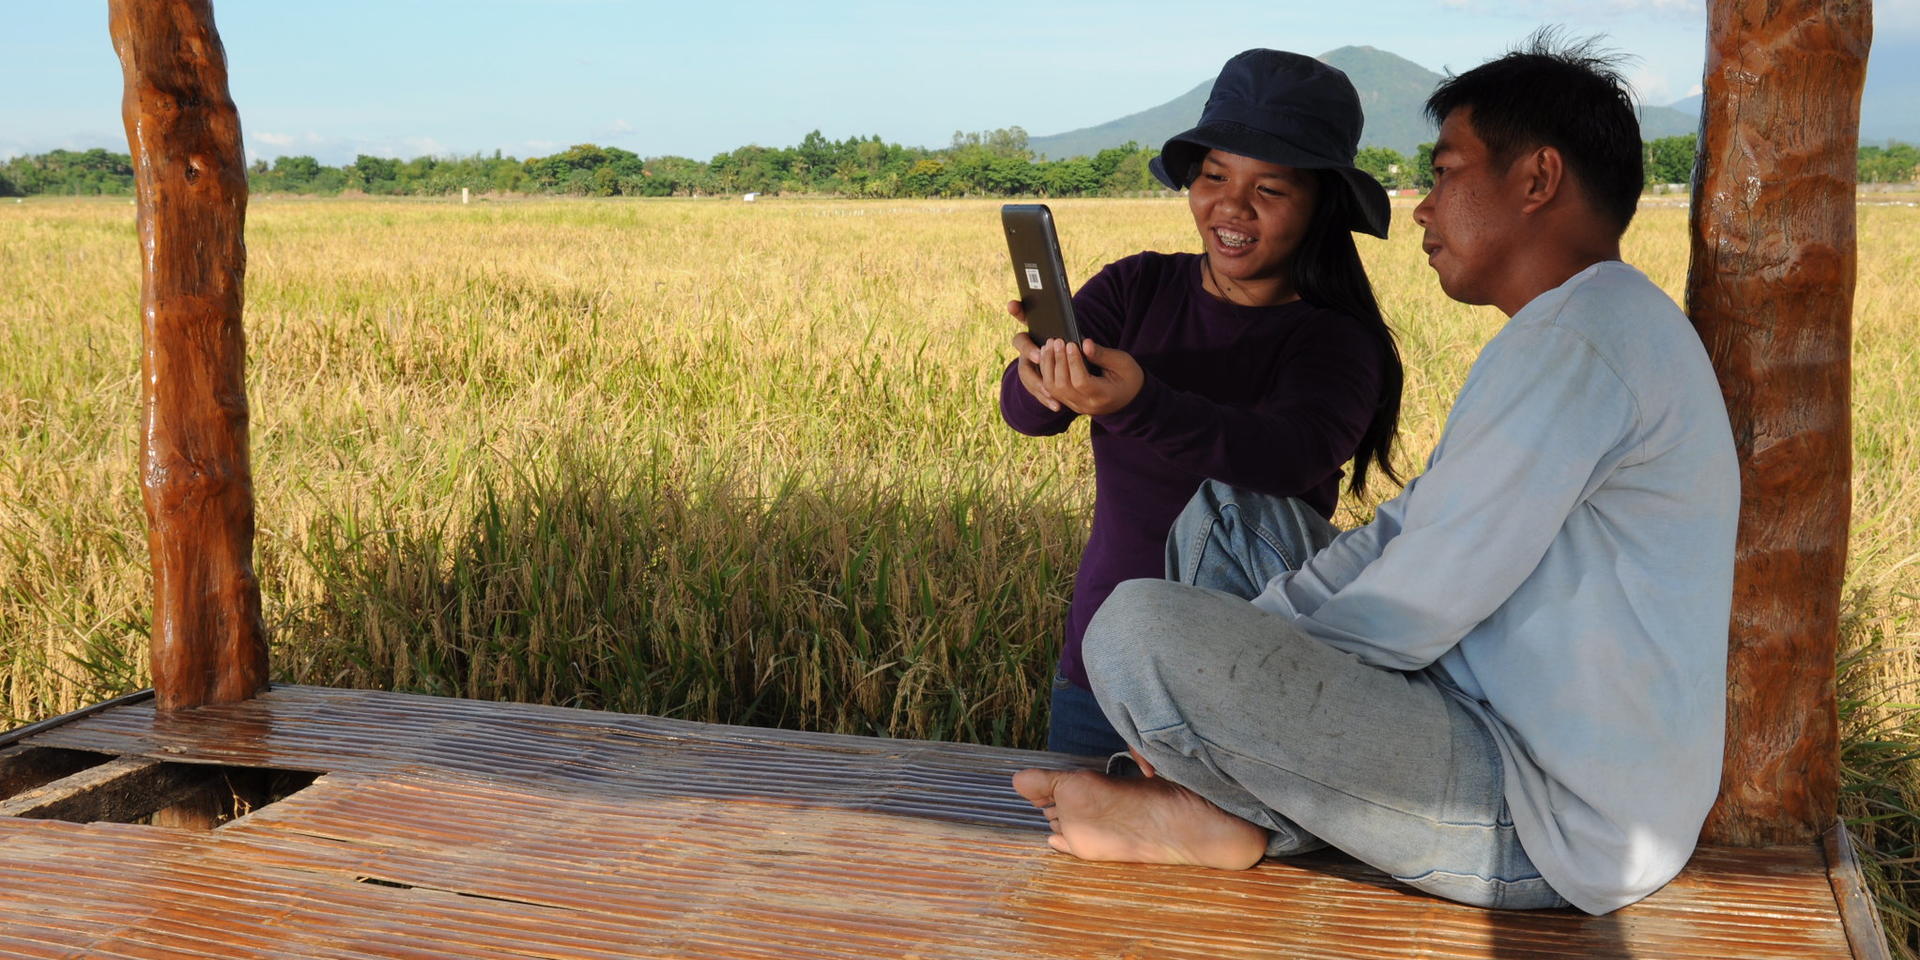 Extension officer and farmer in the Philippines using the rice crop manager